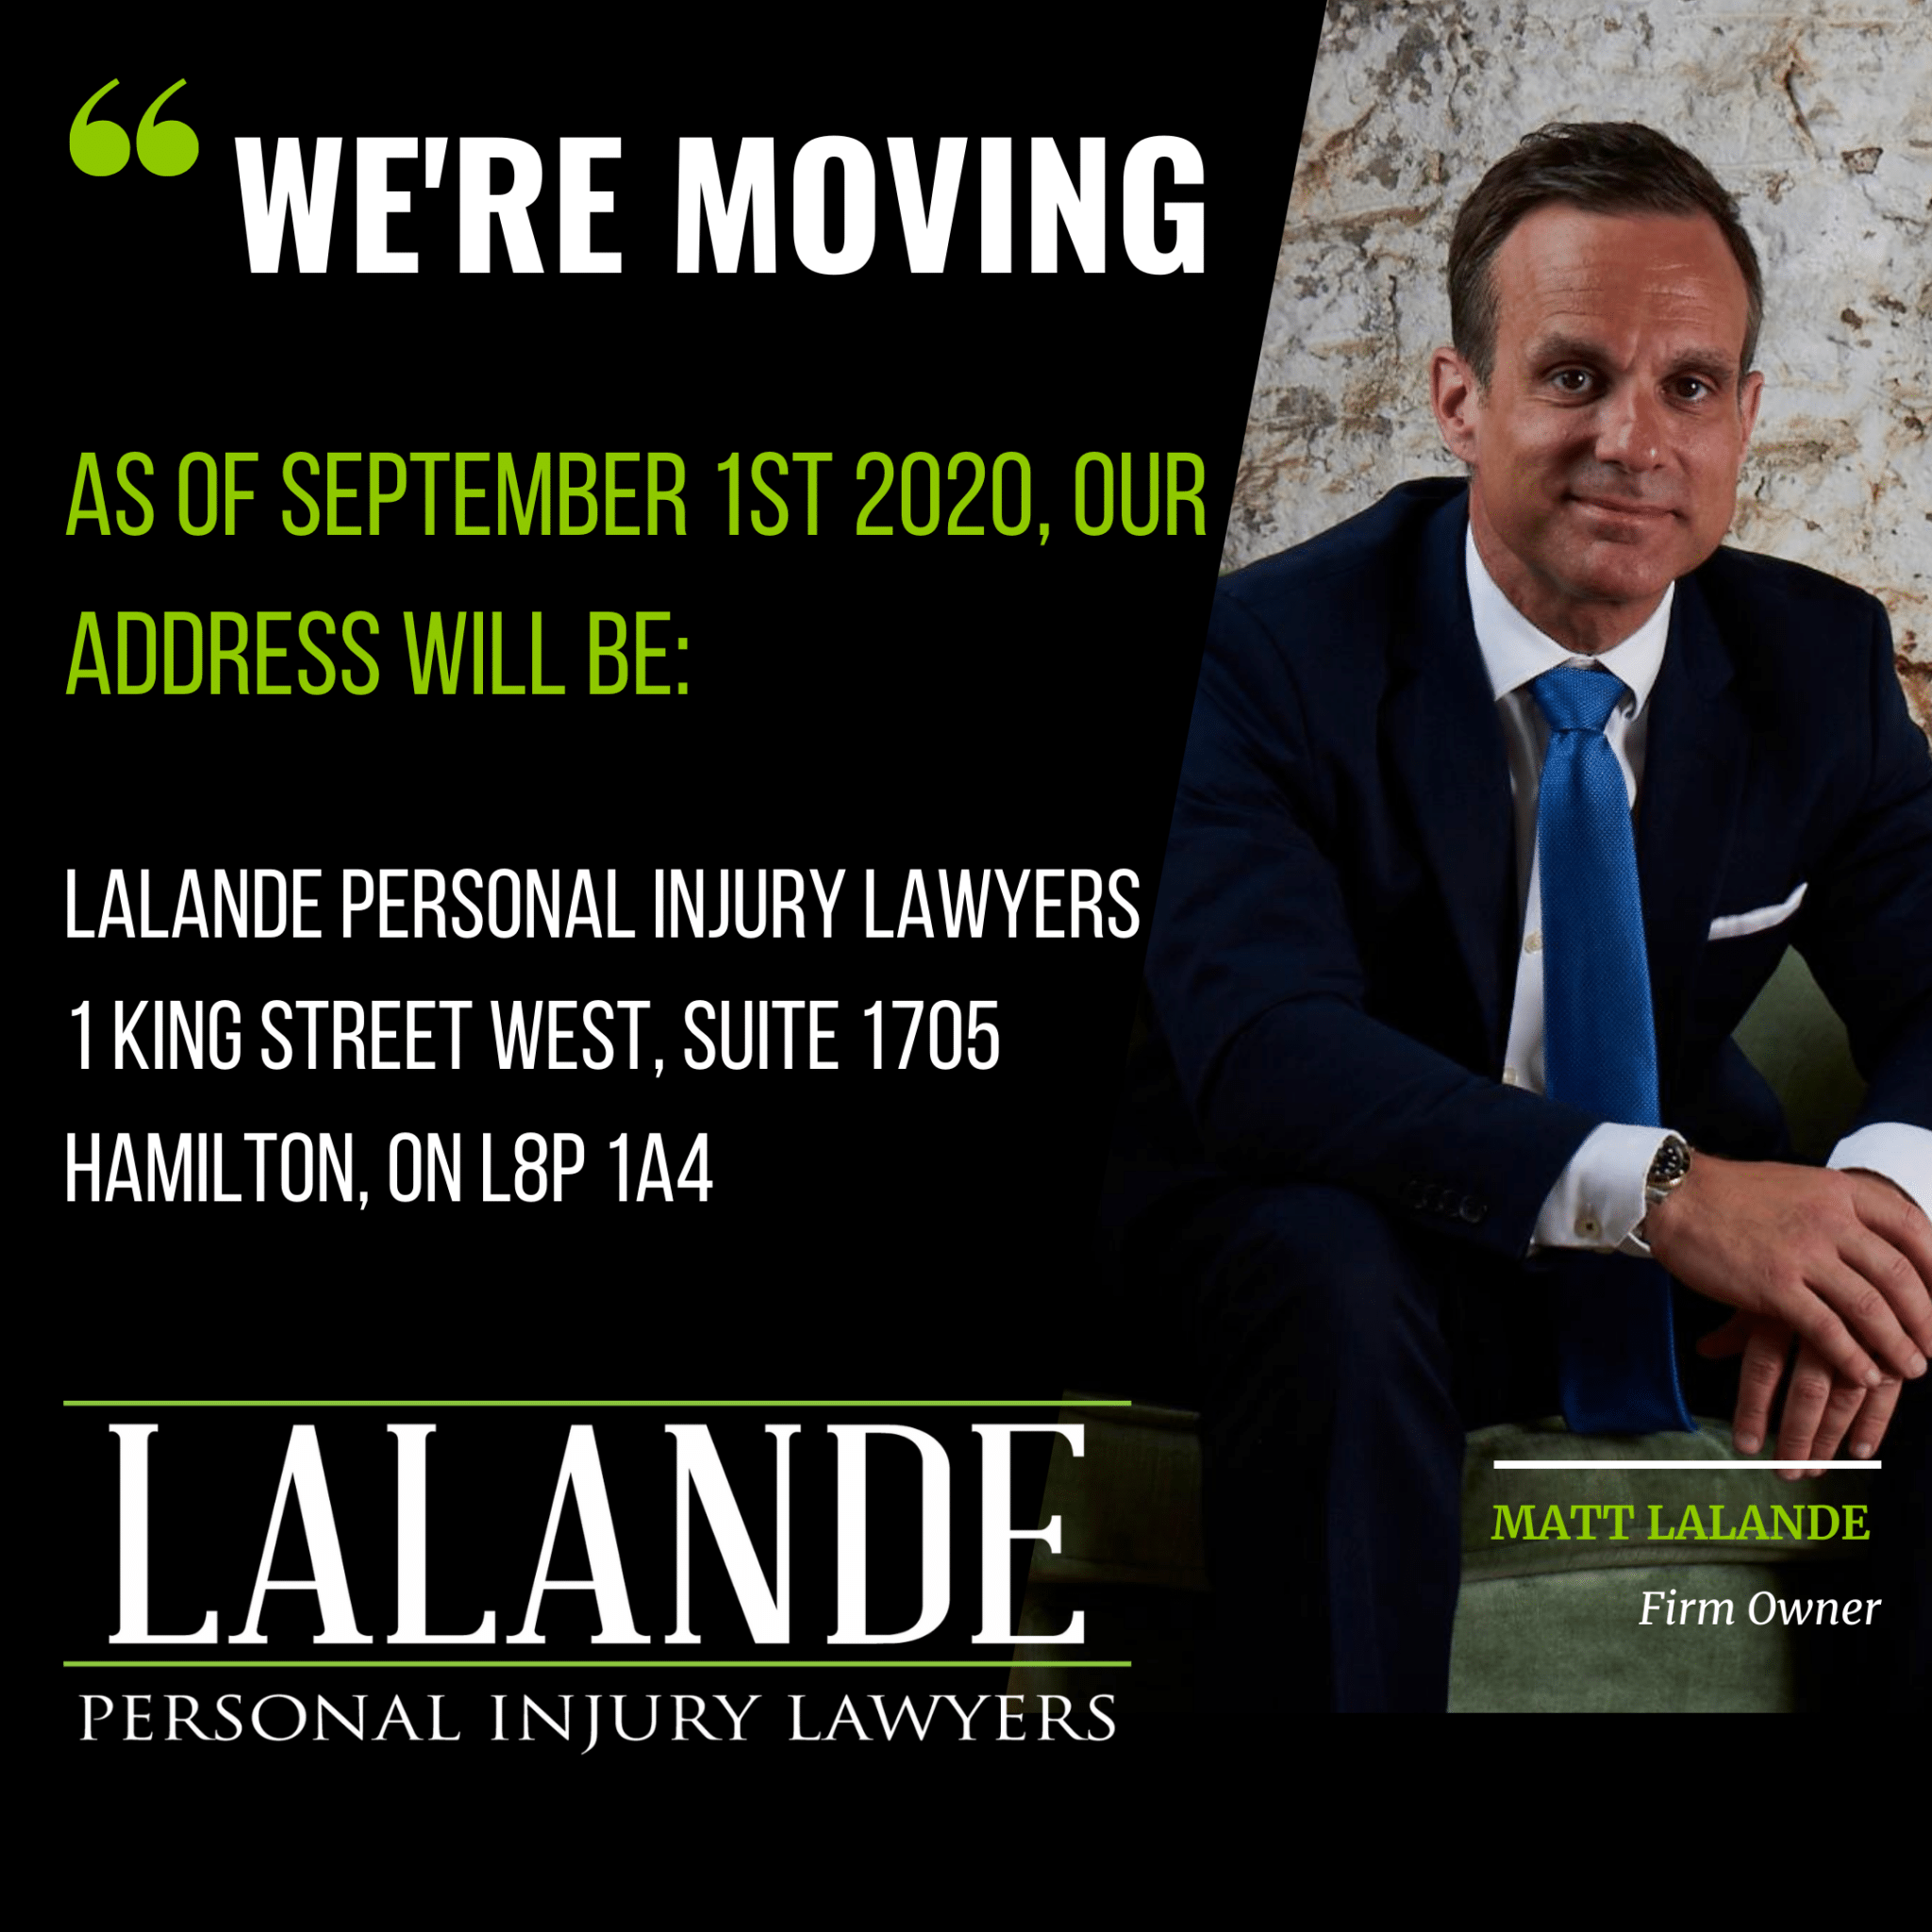 Lalande Personal Injury Lawyers are Moving